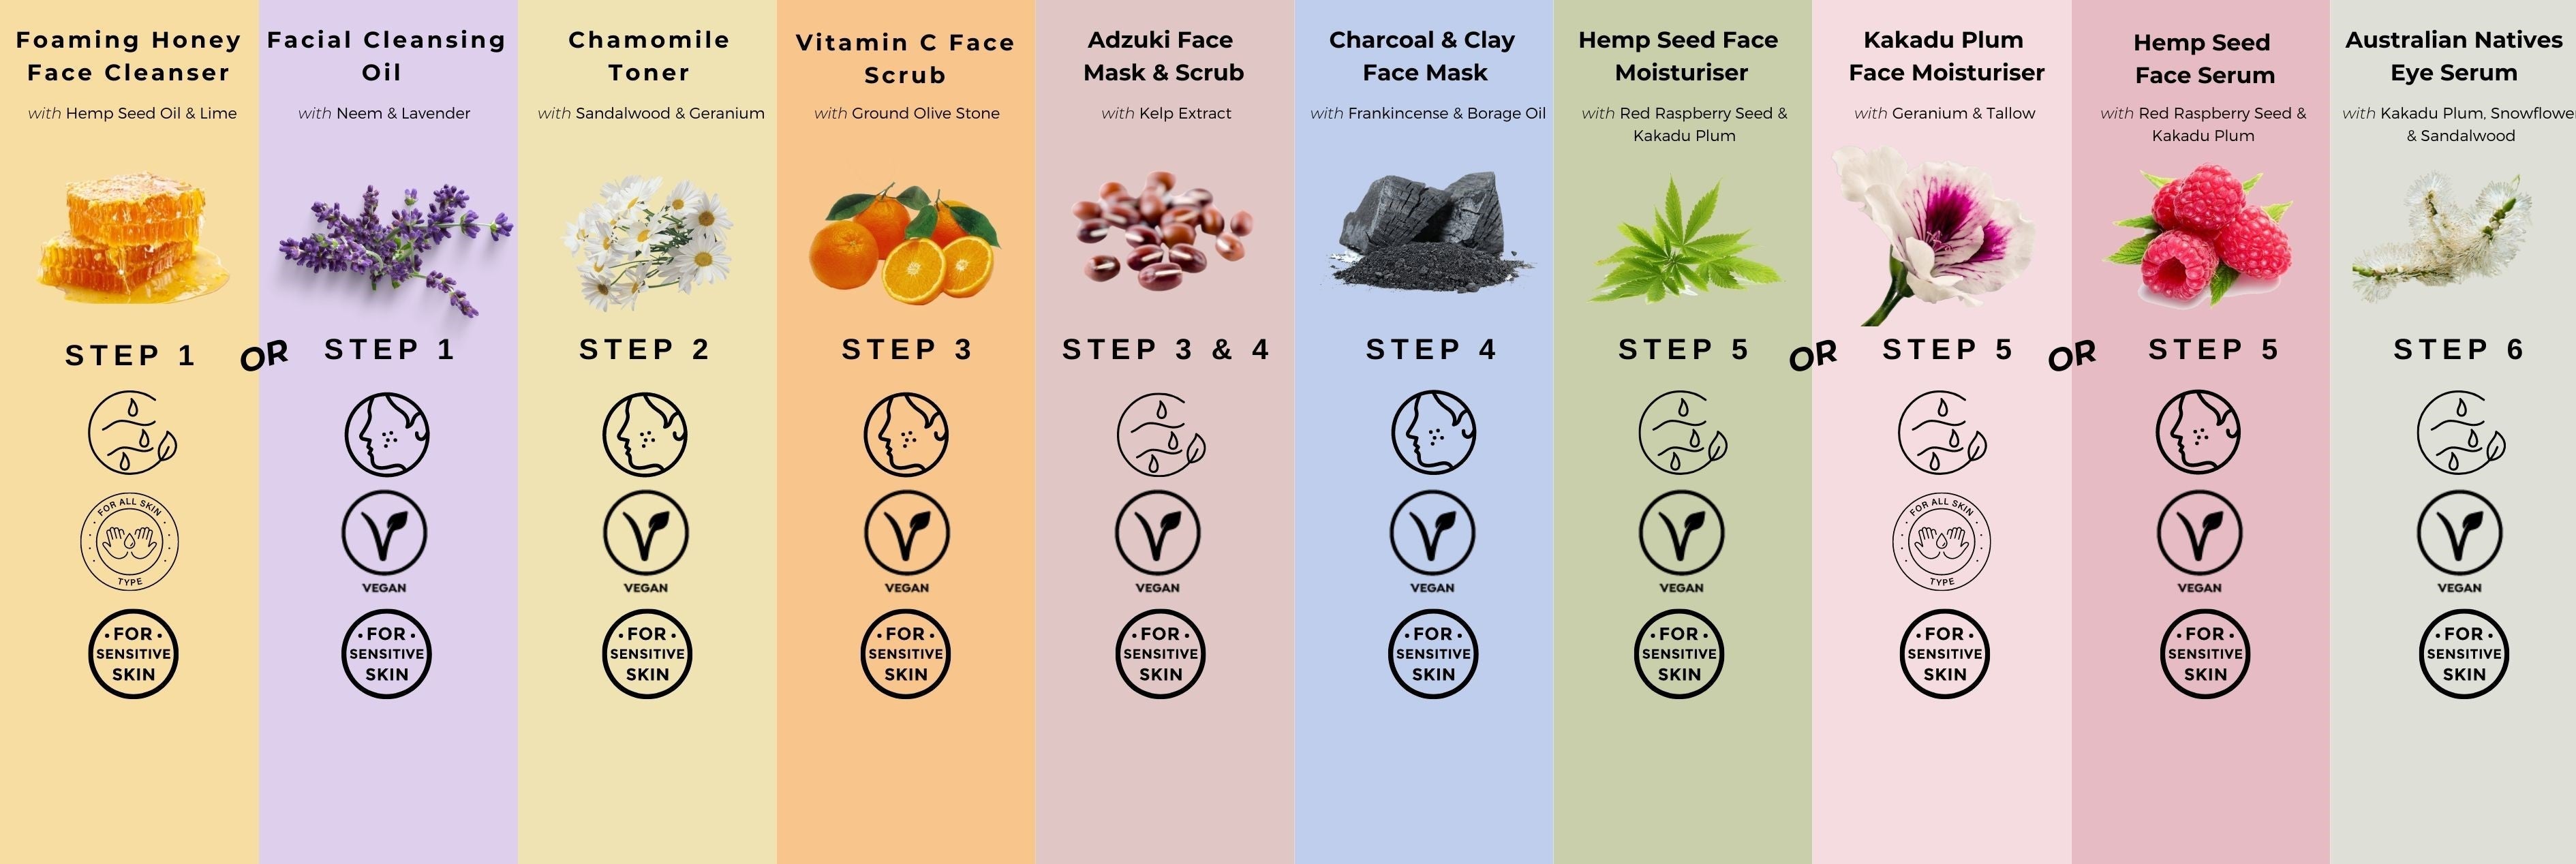 2 Steps or 6? - Your Guide to Natural Skincare. - OmMade Organic Skincare